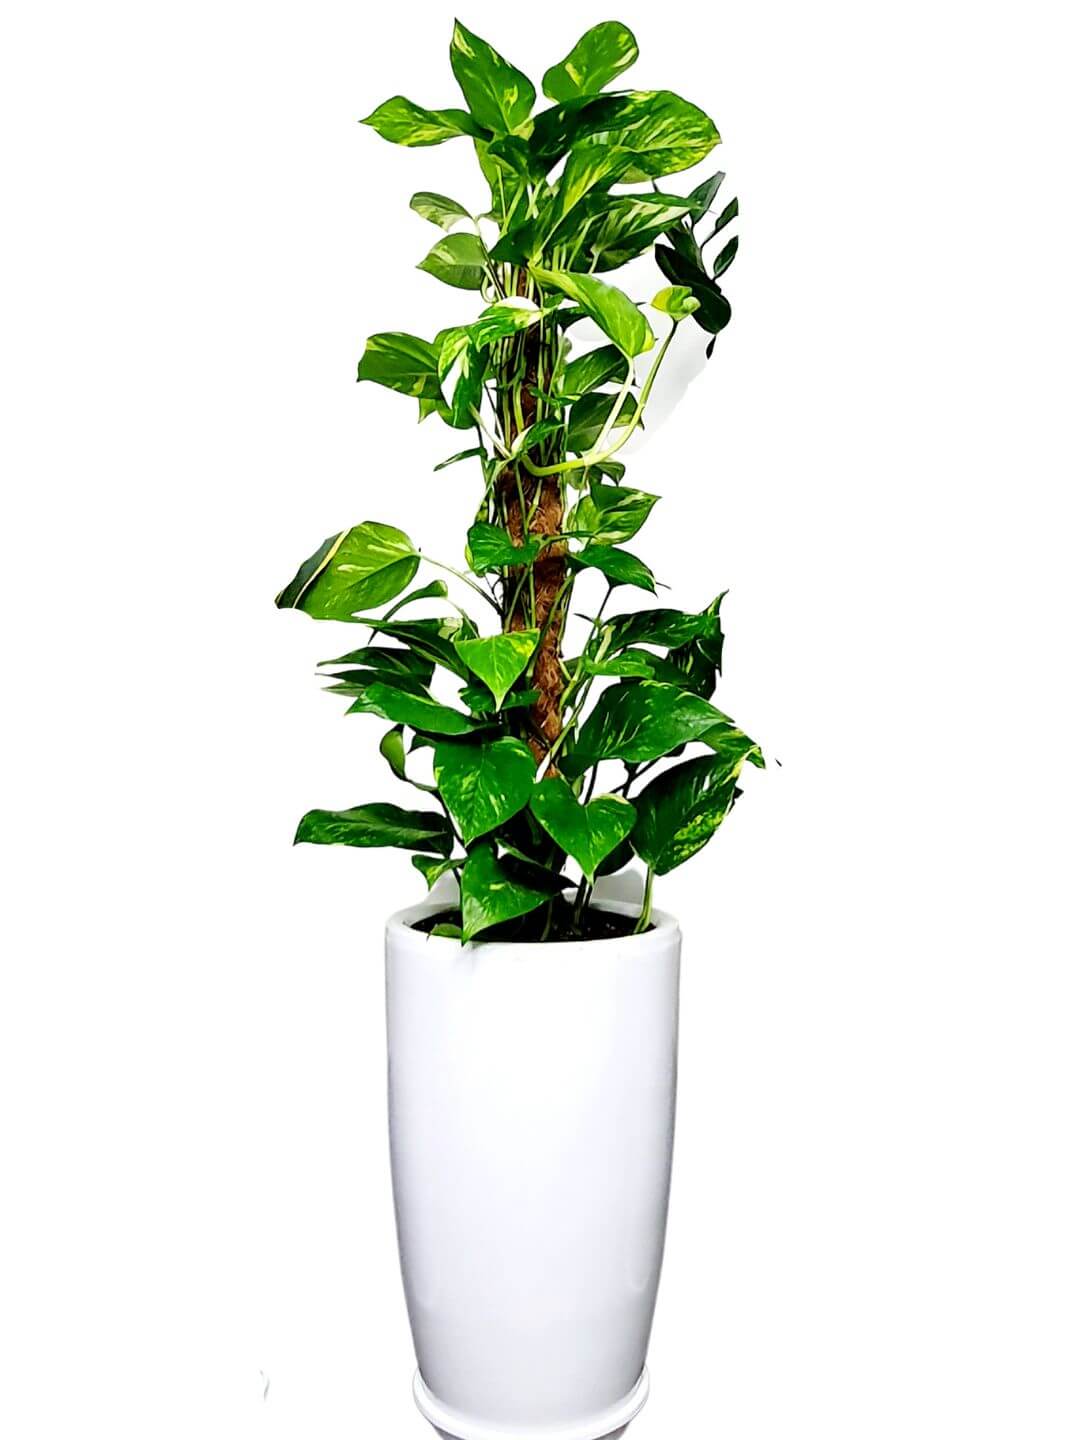 Potted XL Money Plant Planted in Marble Pot